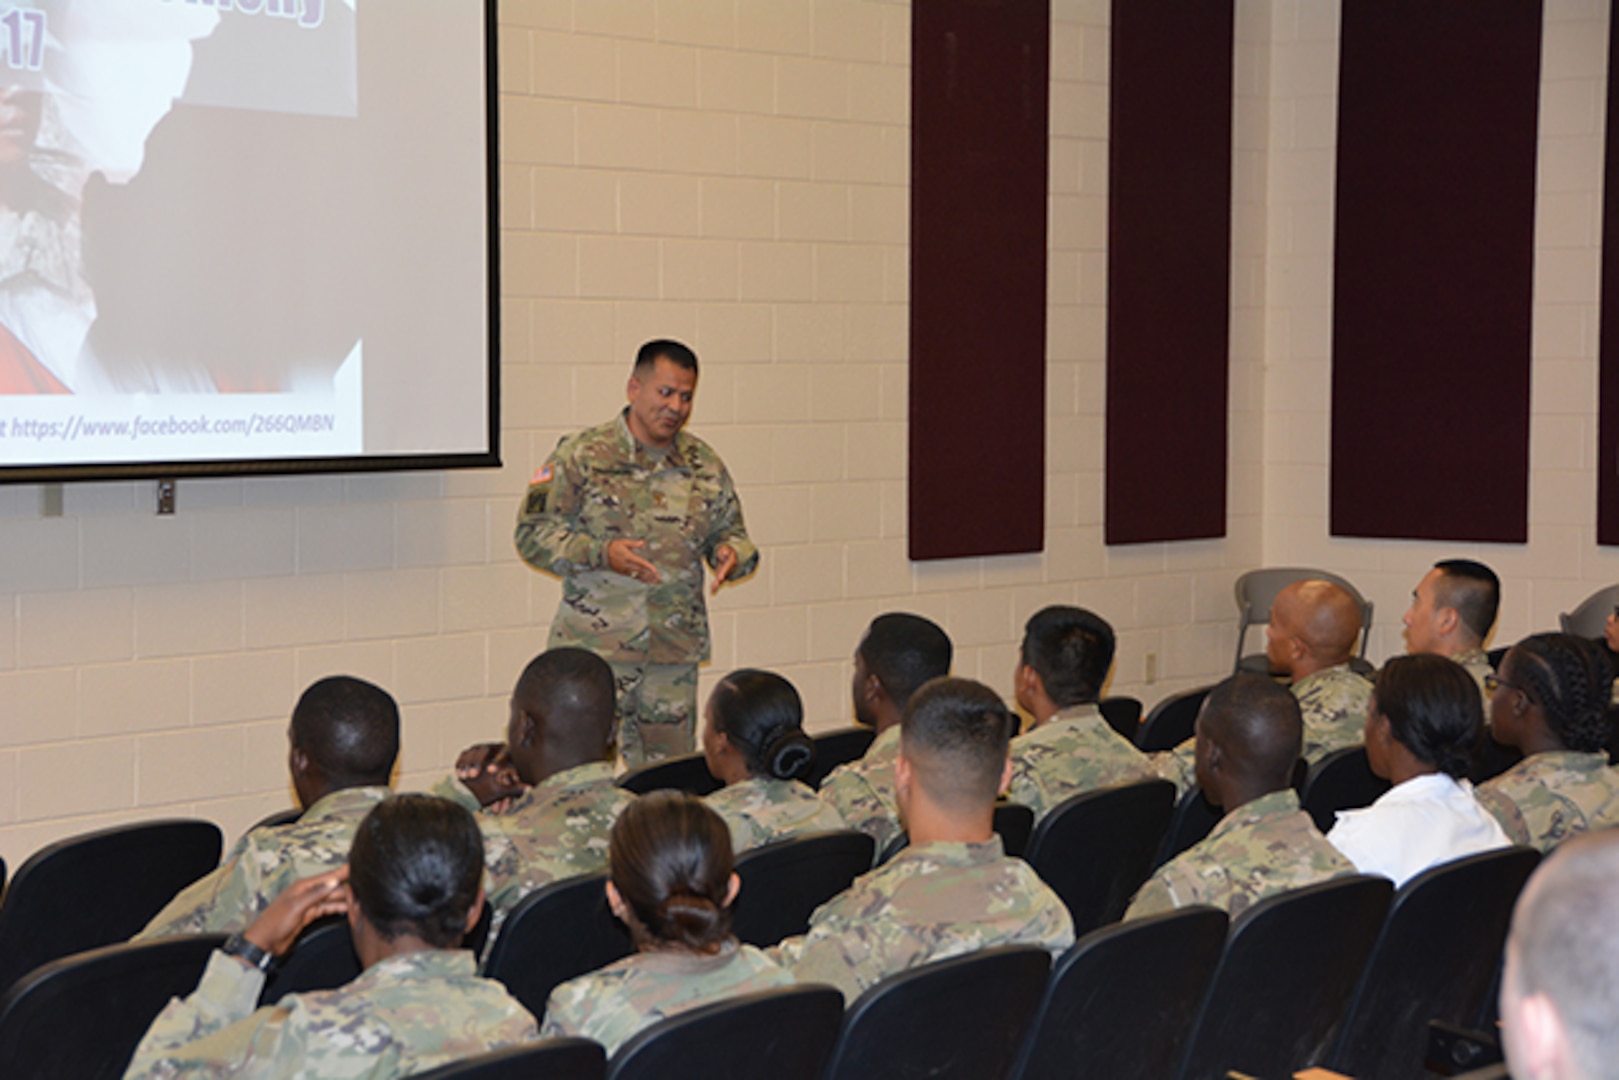 Defense Logistics Agency Aviation Army Maj.  Alex Shimabukuro shares his naturalization story with 28 service members from 18 countries May 30, 2017 as they joined the latest ranks of U.S. citizens during a naturalization ceremony held at Fort Lee, Virginia’s Soldier Support Center.  